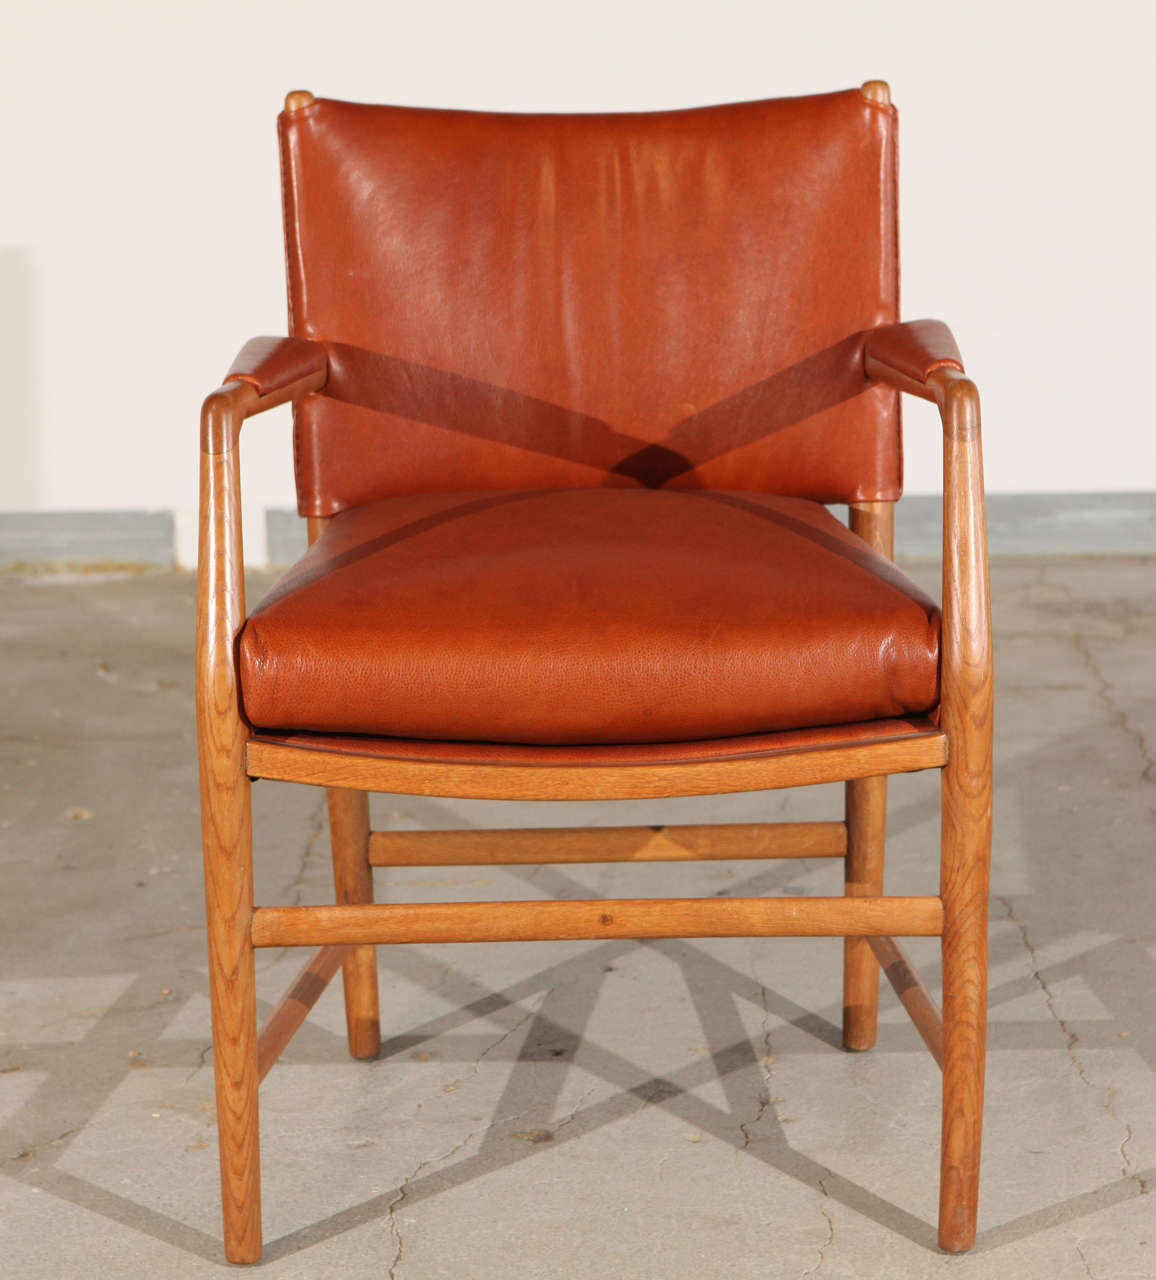 Pair of Hans Wegner leather upholstered armchairs designed for Aarhus Town Hall.